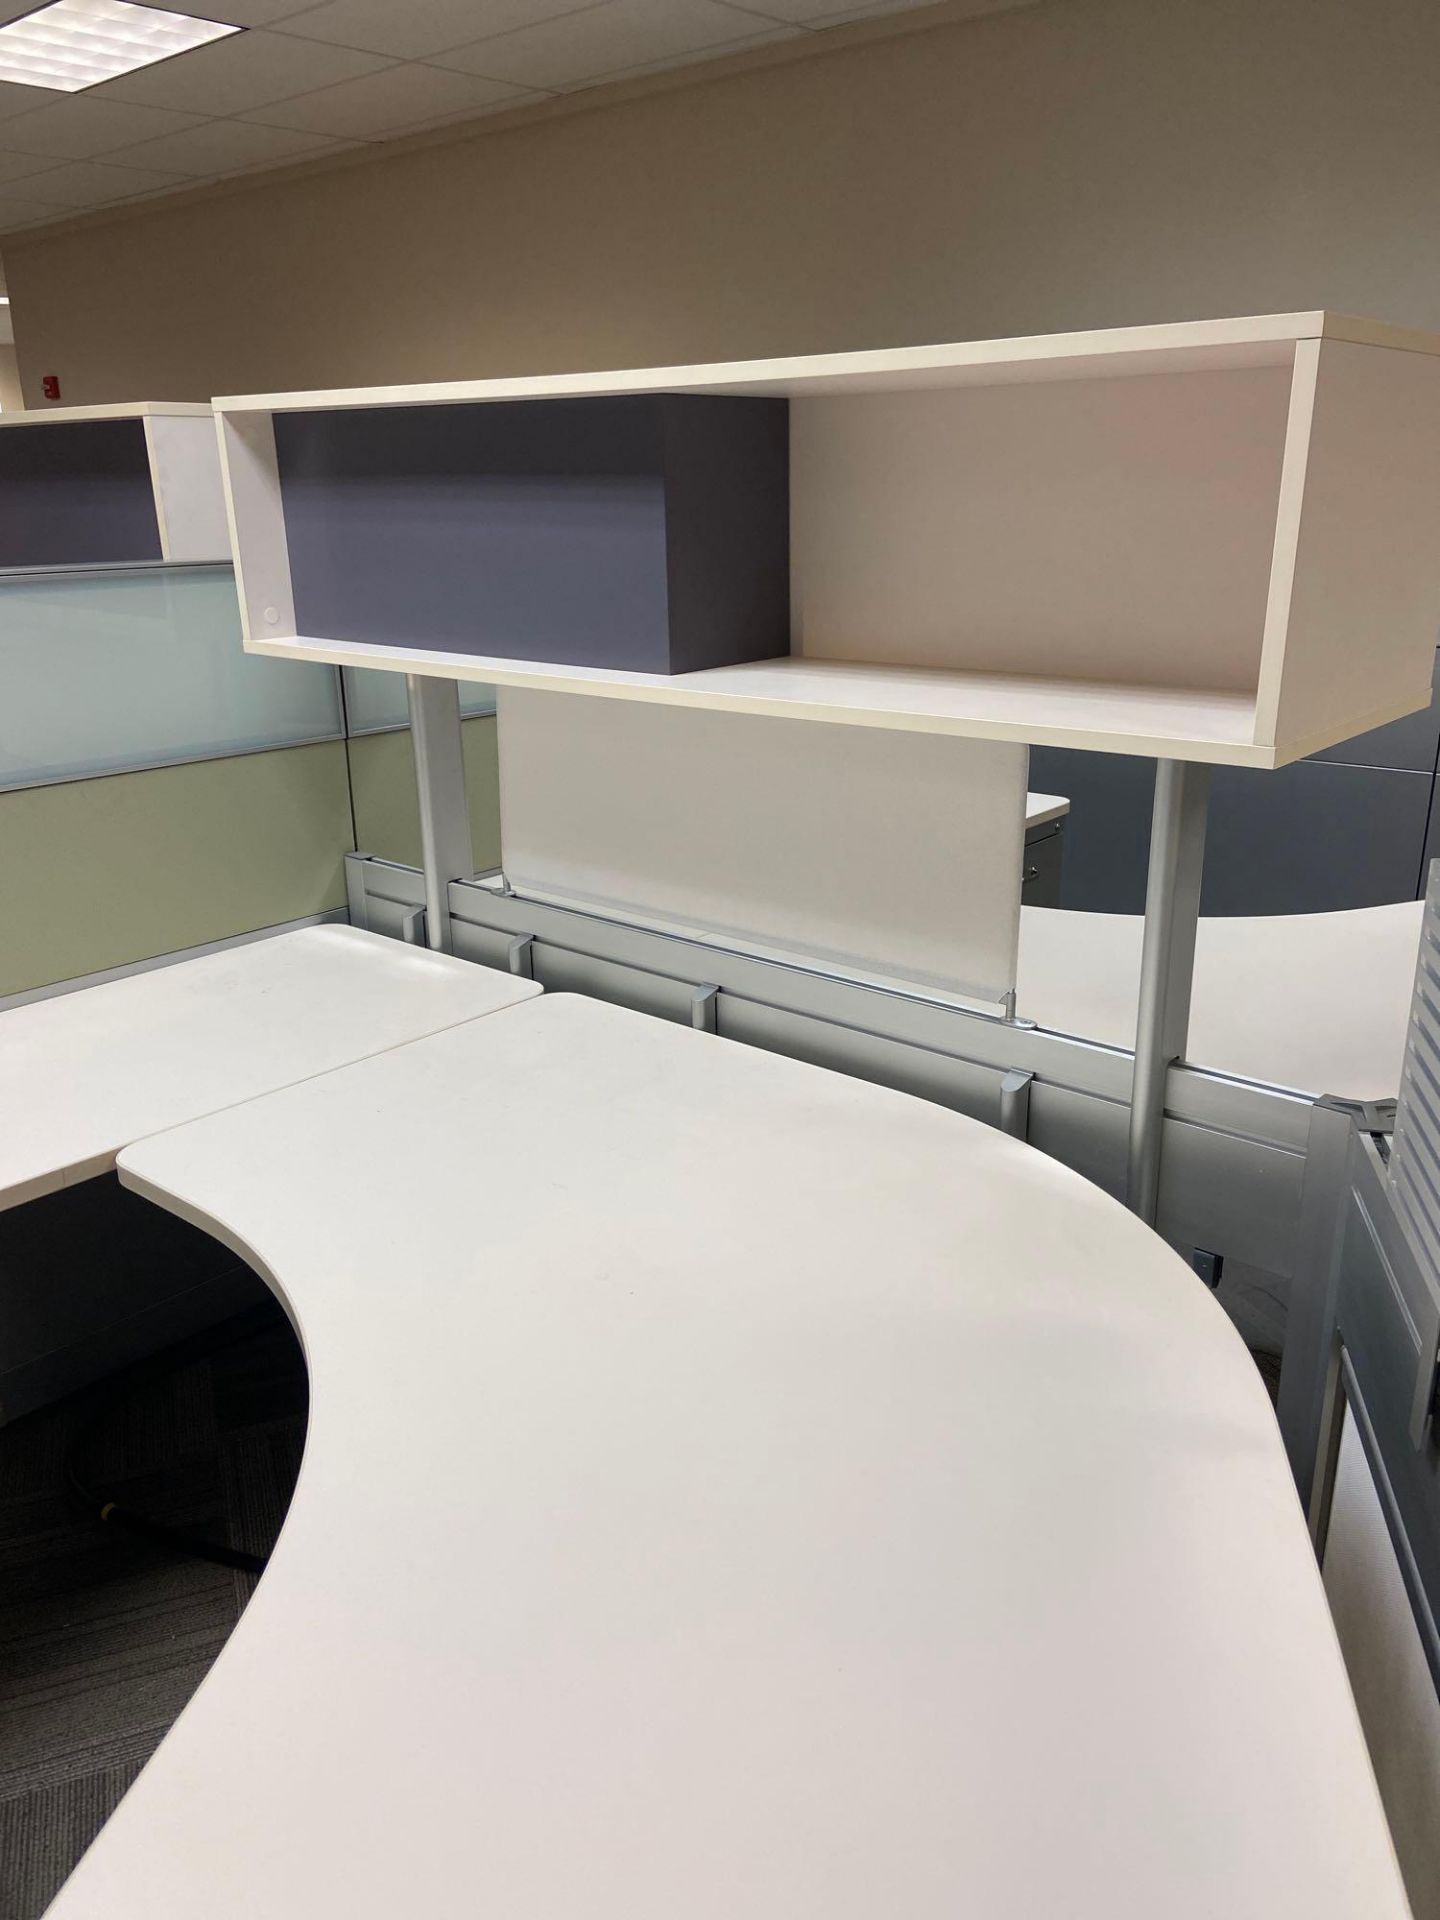 8-Sectional Cubicle w/ U-Shaped Table, 2-Drawer Box Files and Over Head Hutches - Image 8 of 9